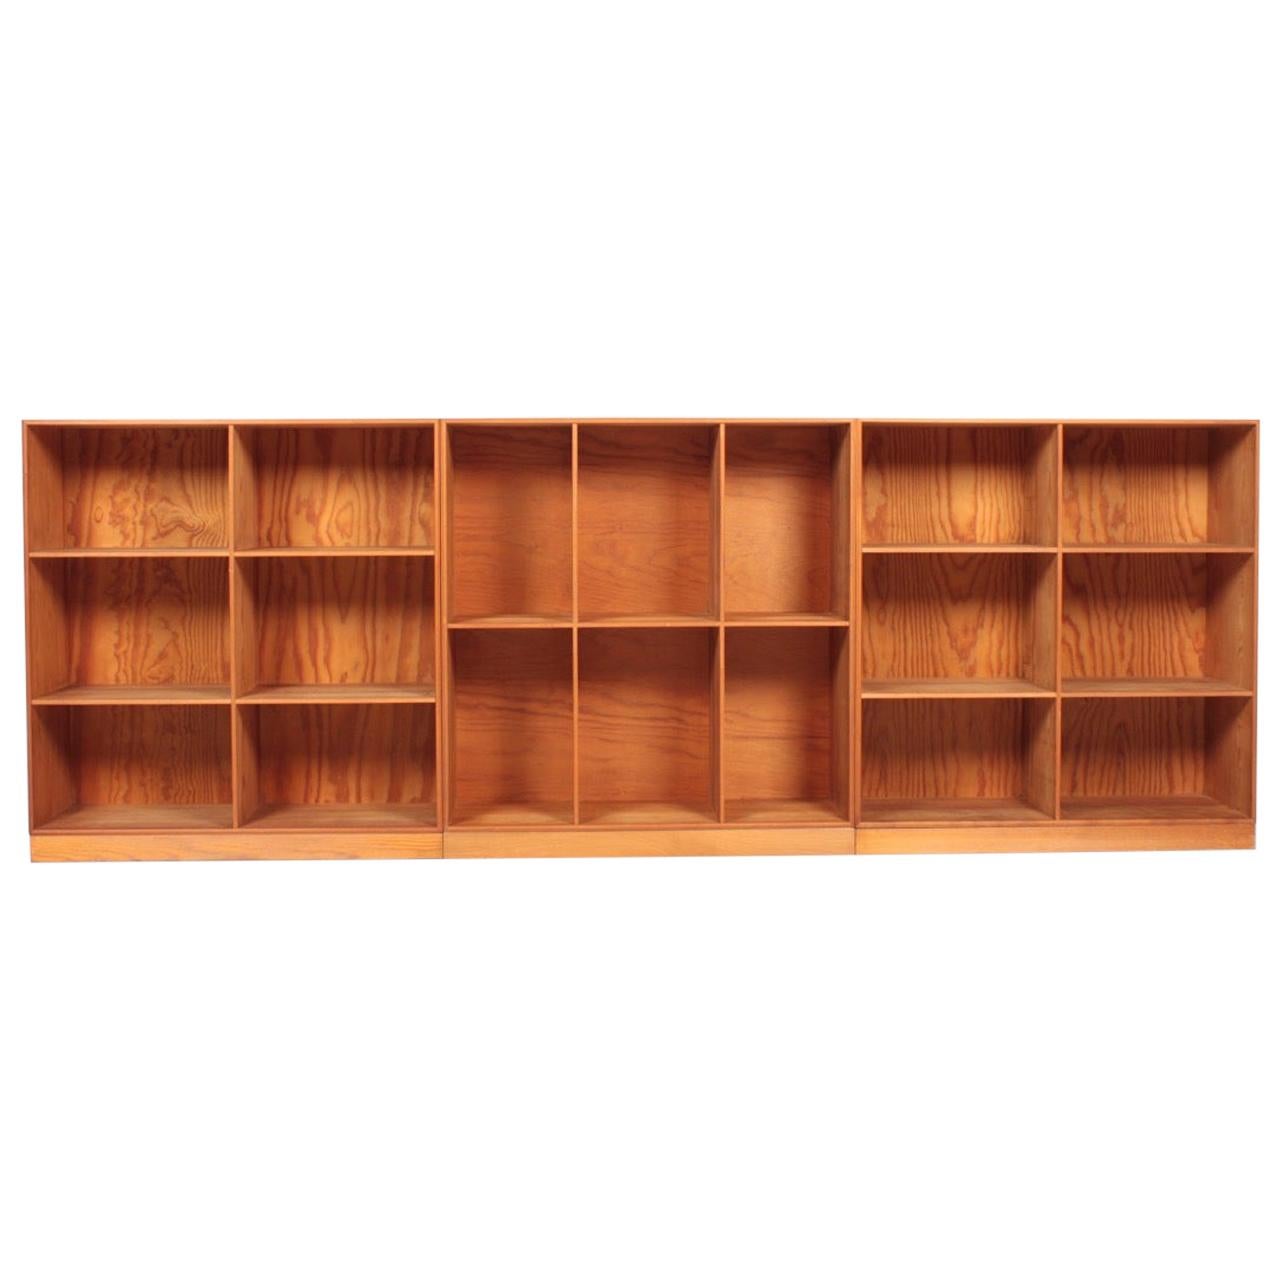 Set of Three Bookcases in Pine by Mogens Koch, Danish Design, Midcentury 1950s